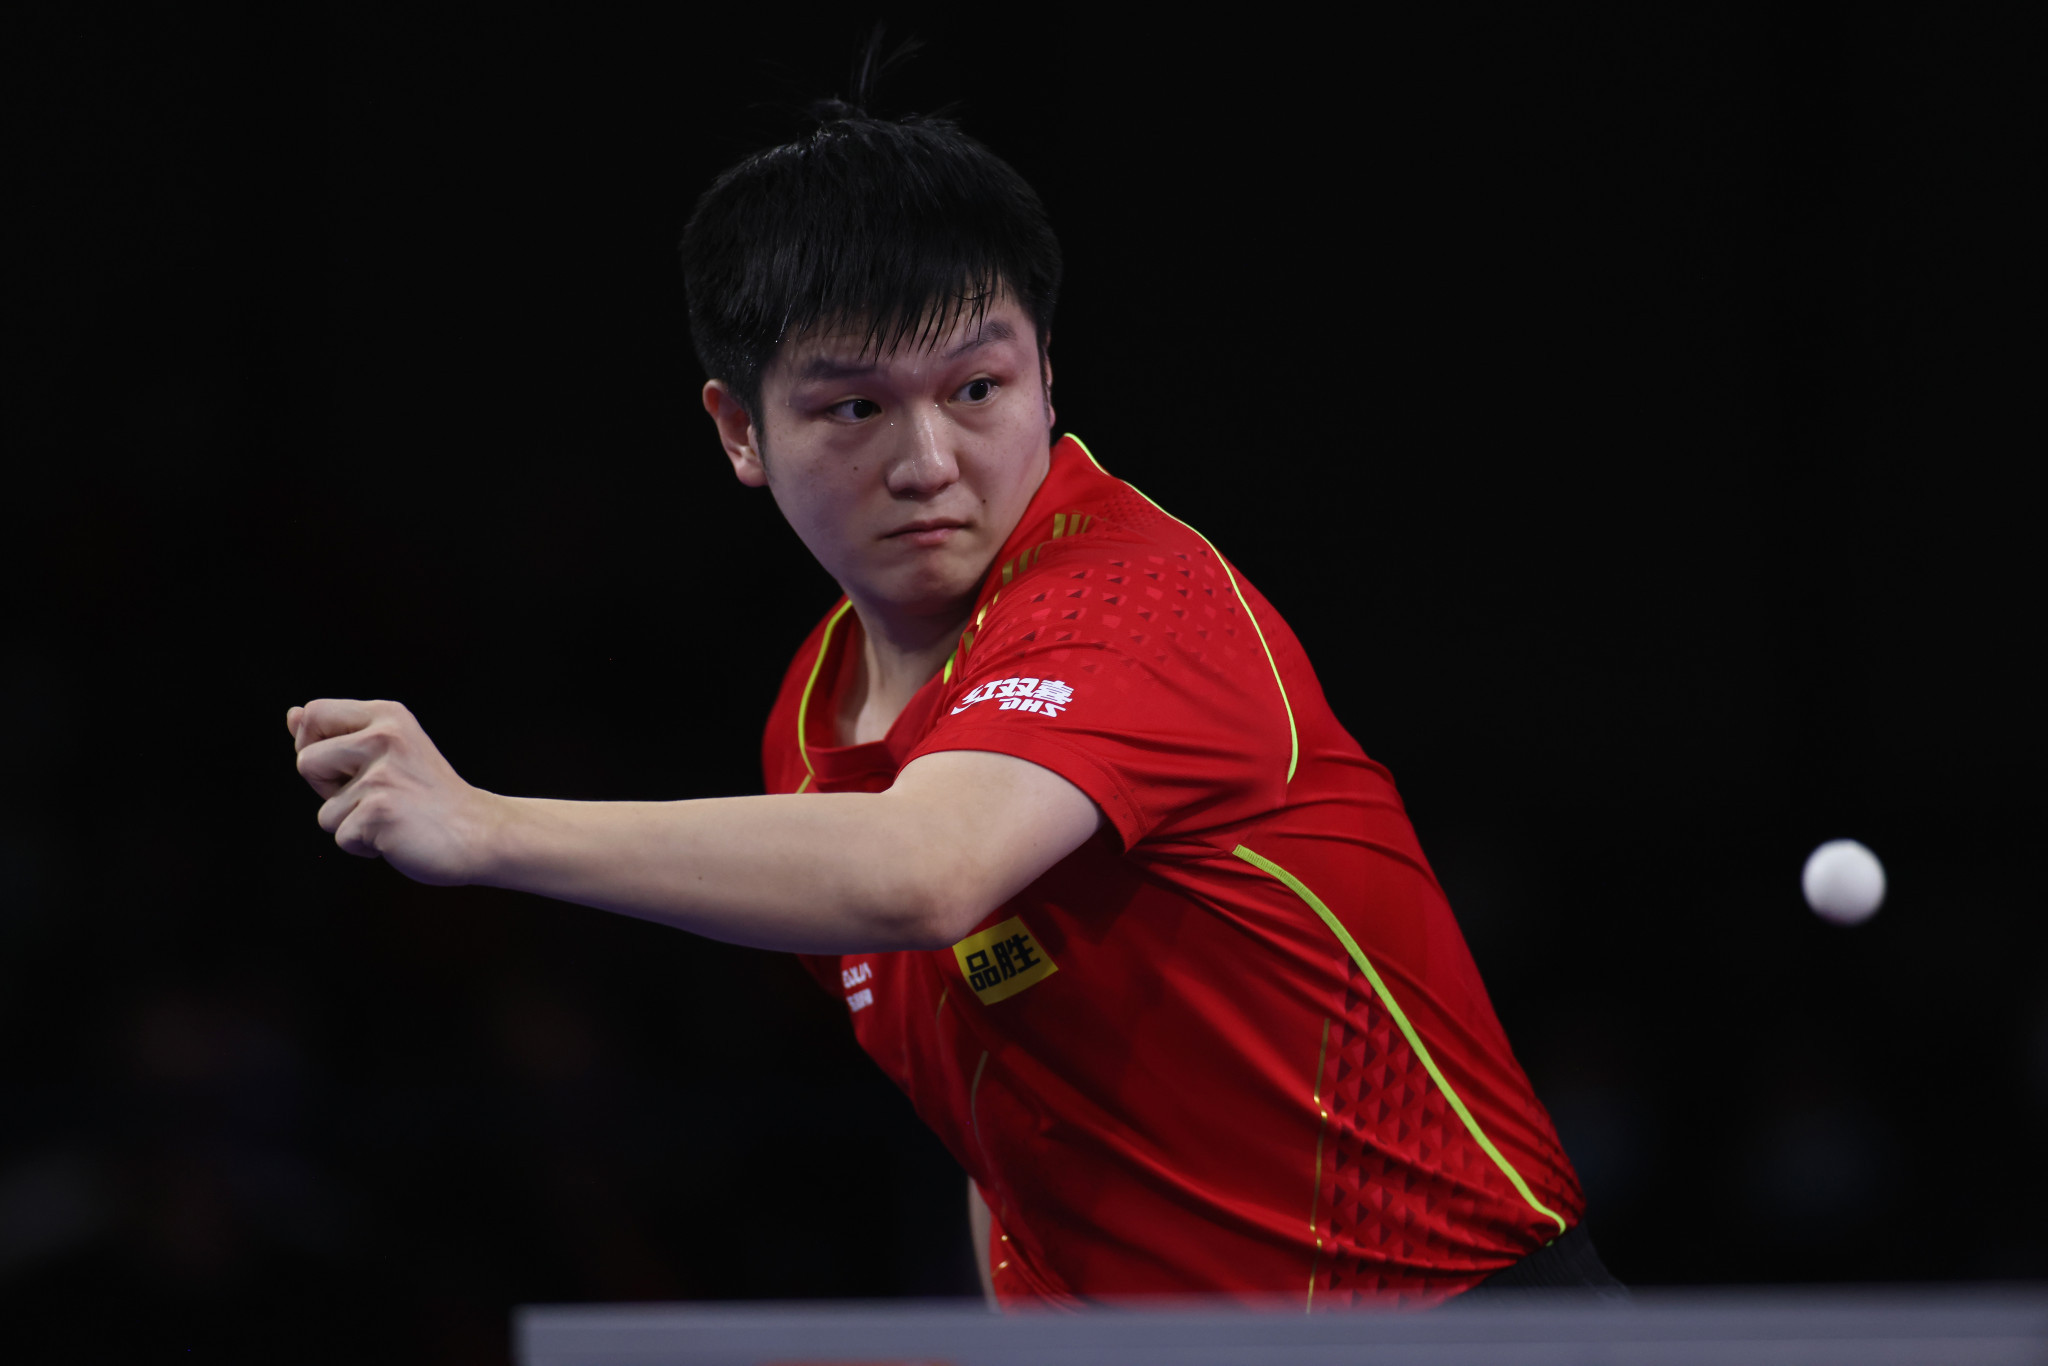 World number one Fan Zhendong will be aiming to secure the men's singles title at the WTT Cup Finals ©Getty Images